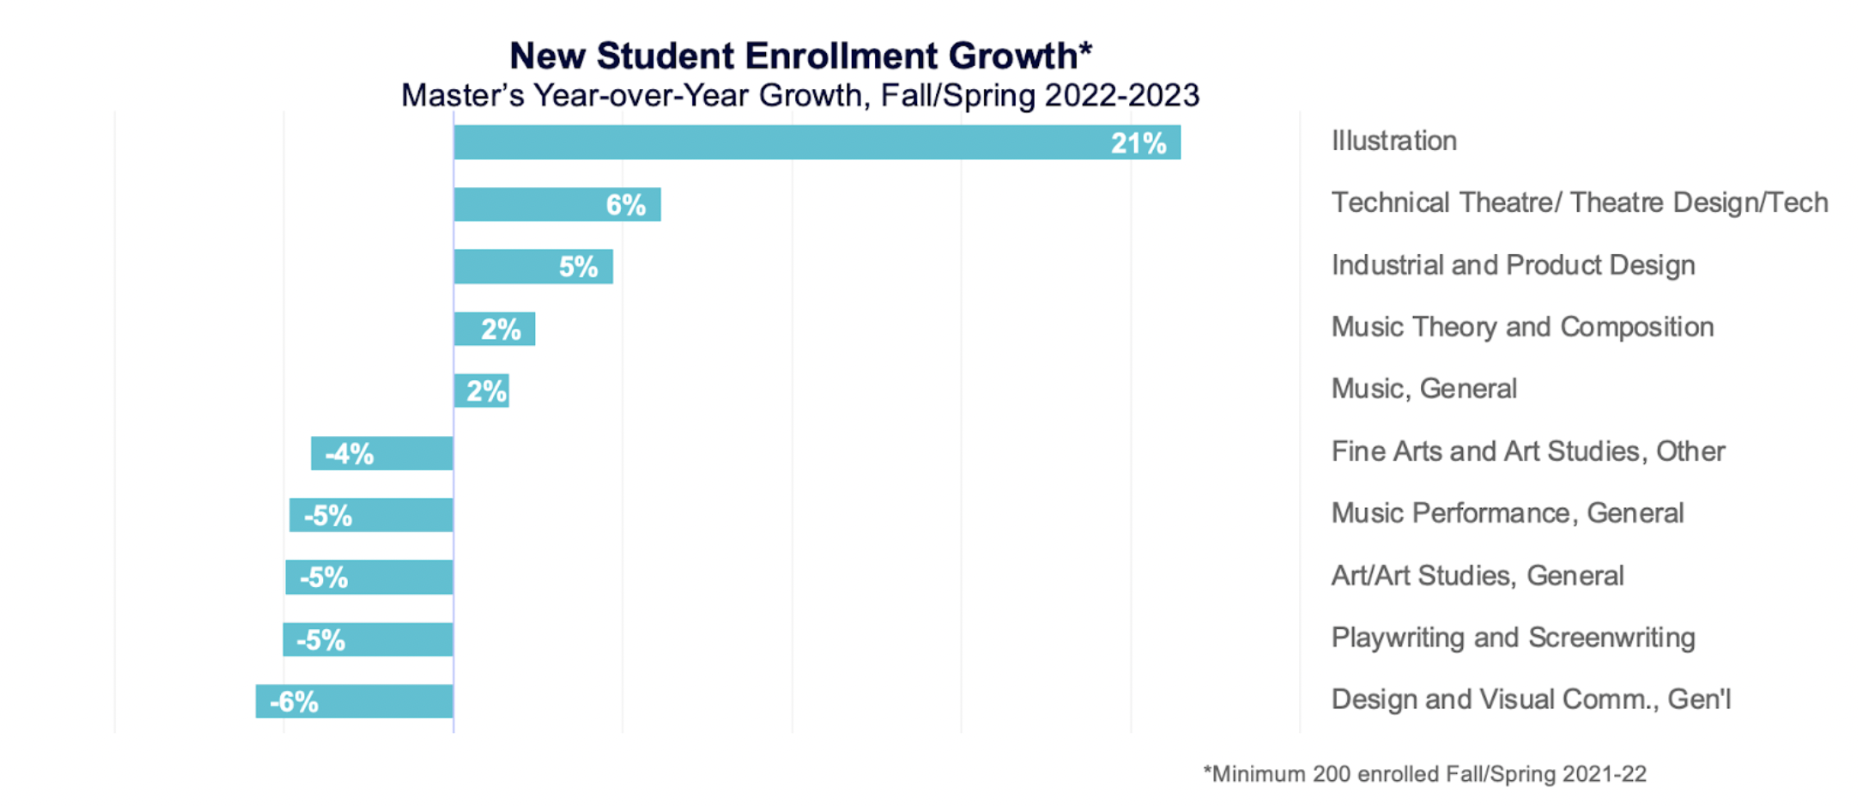 New Student Enrollment Growth* Masters YOY Growth, Fall/Spring 2022-23